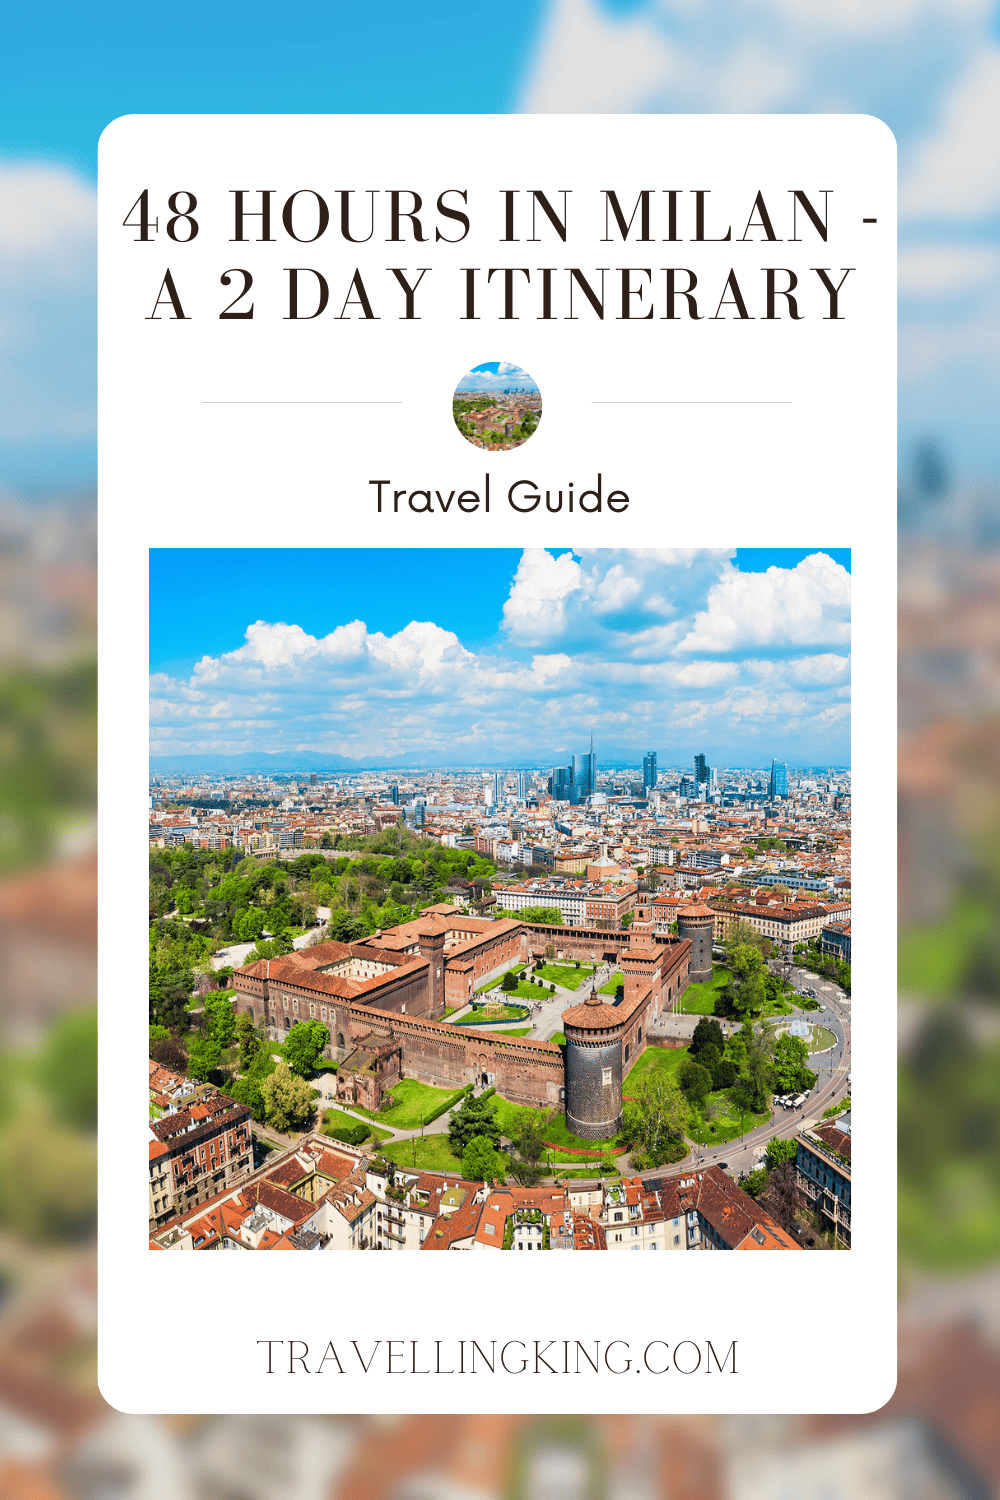 48 hours in Milan - A 2 day Itinerary